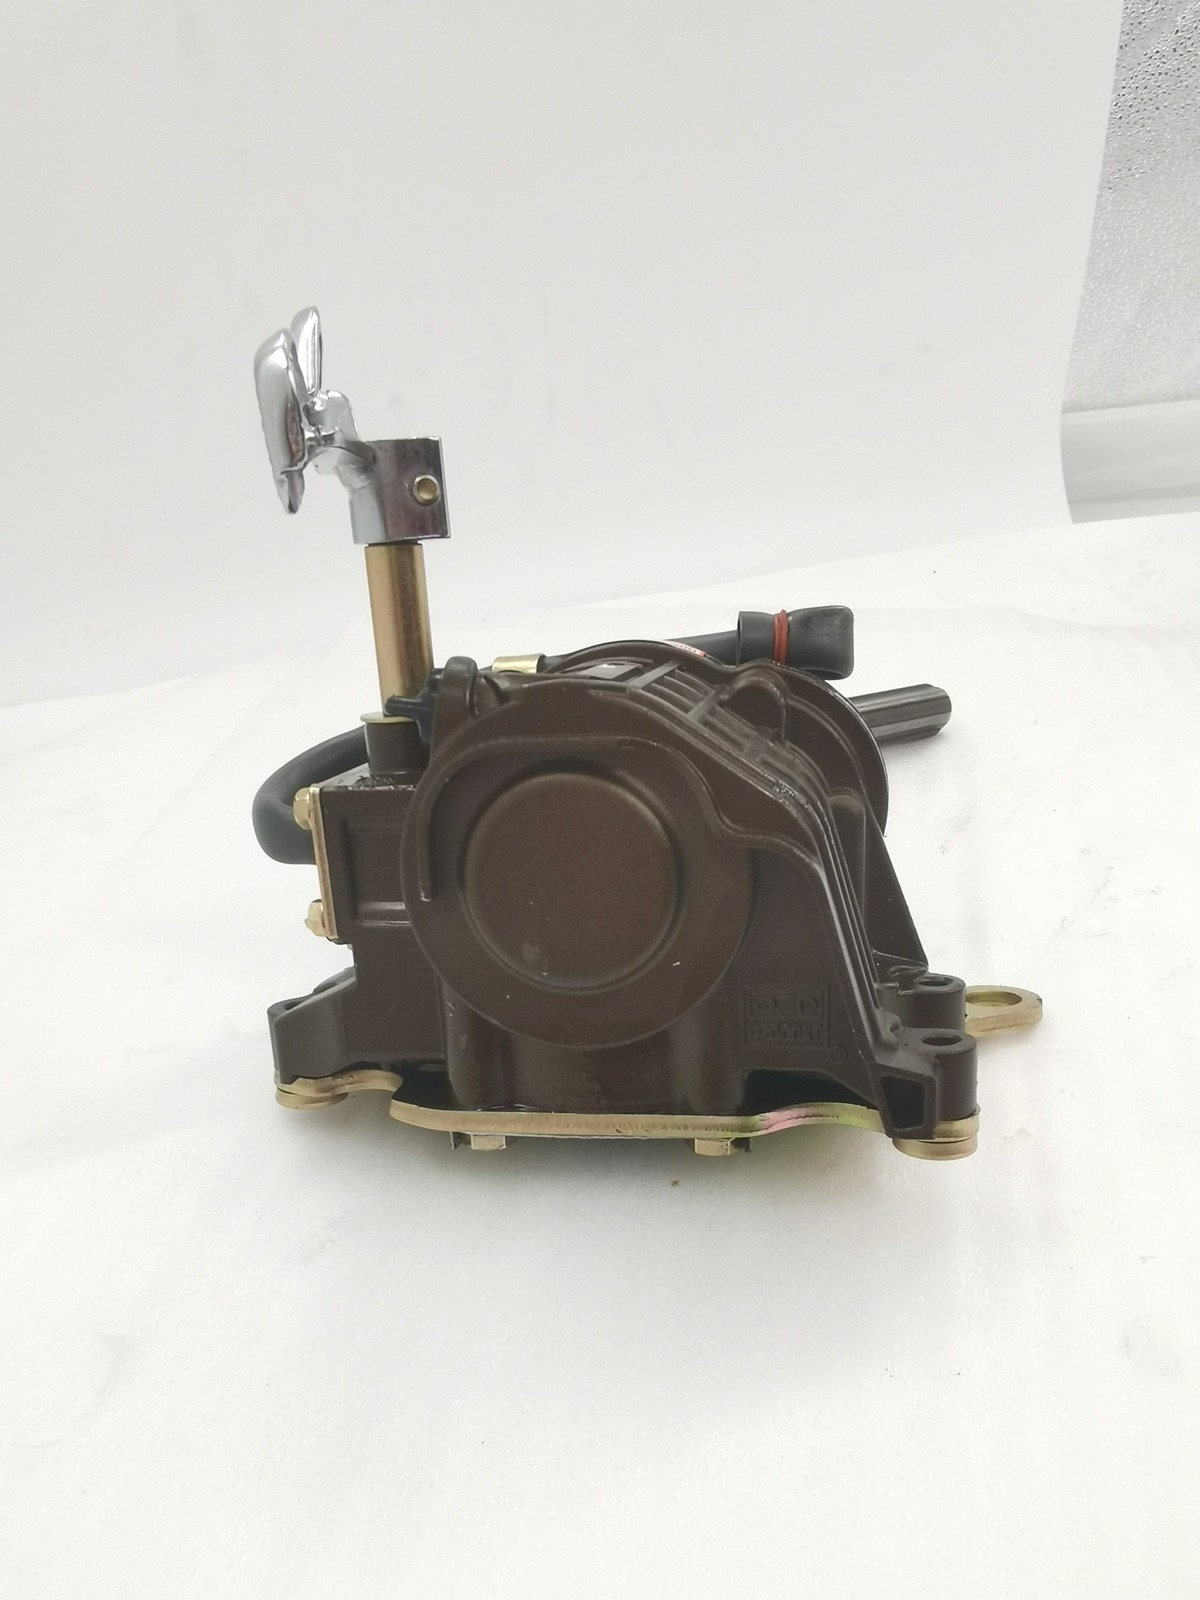 Reverse gear box Various Good Quality Gear Box Gearbox Motor Speed Reducer Gear Box Planetary  Large Stock Top Quality